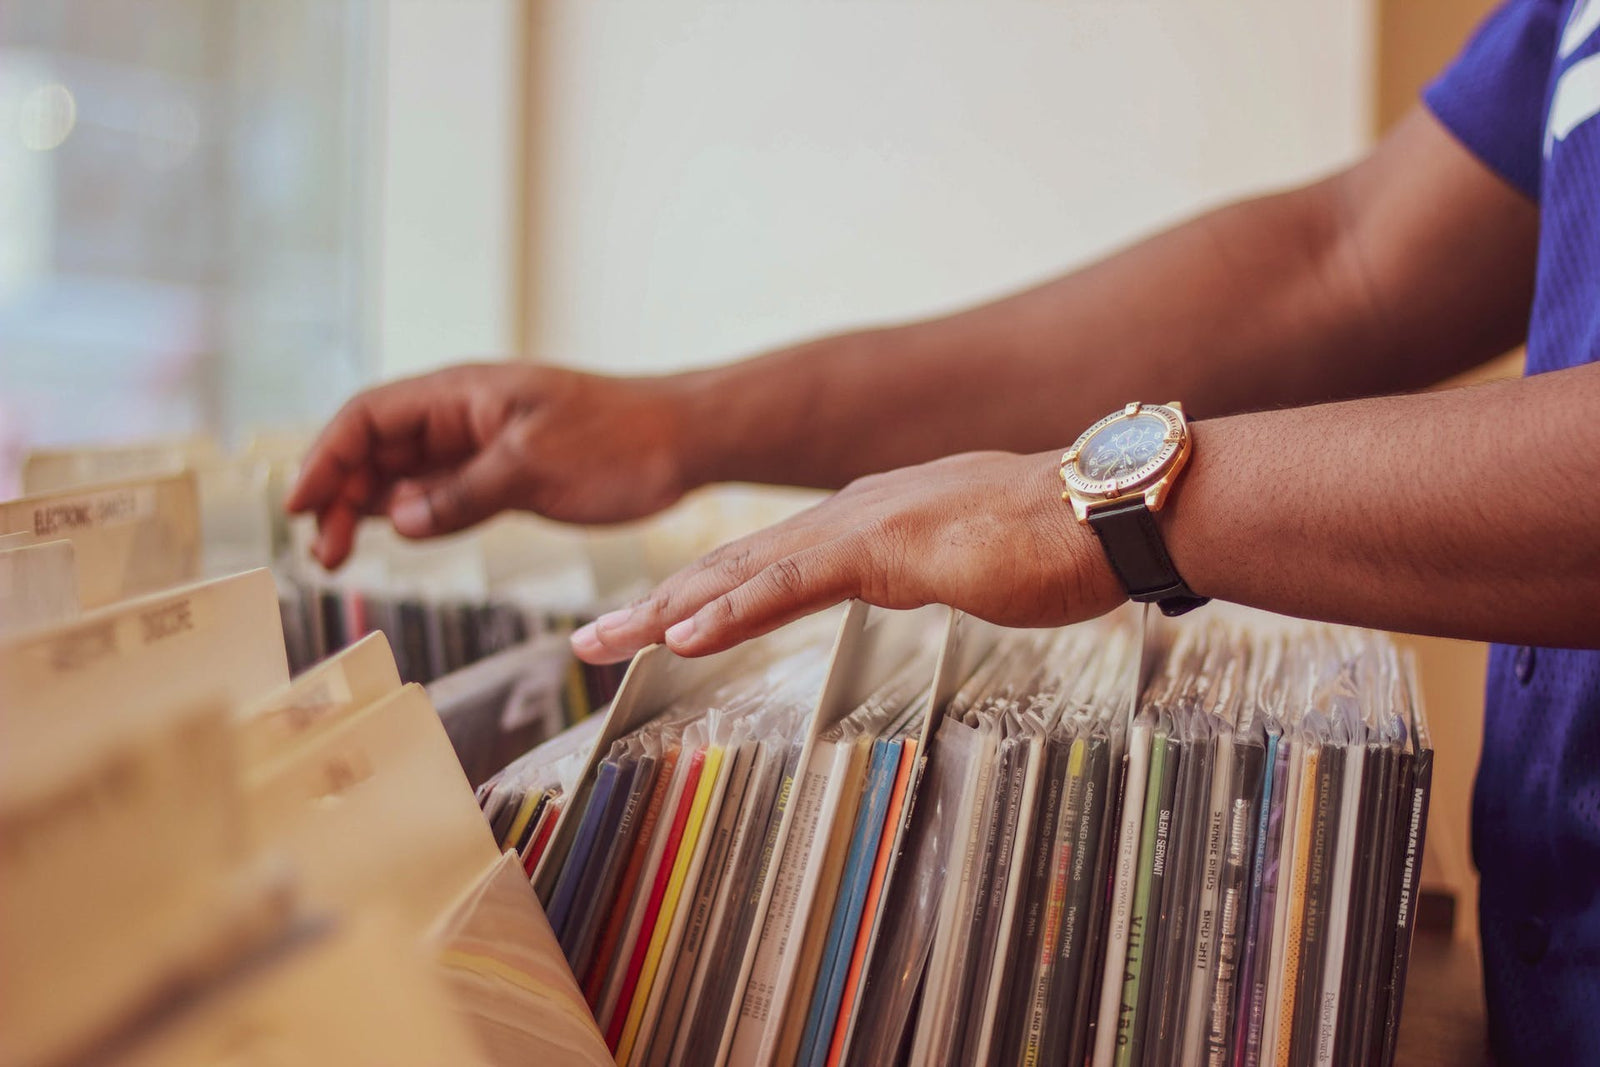 Deciding if vinyl records are worth keeping